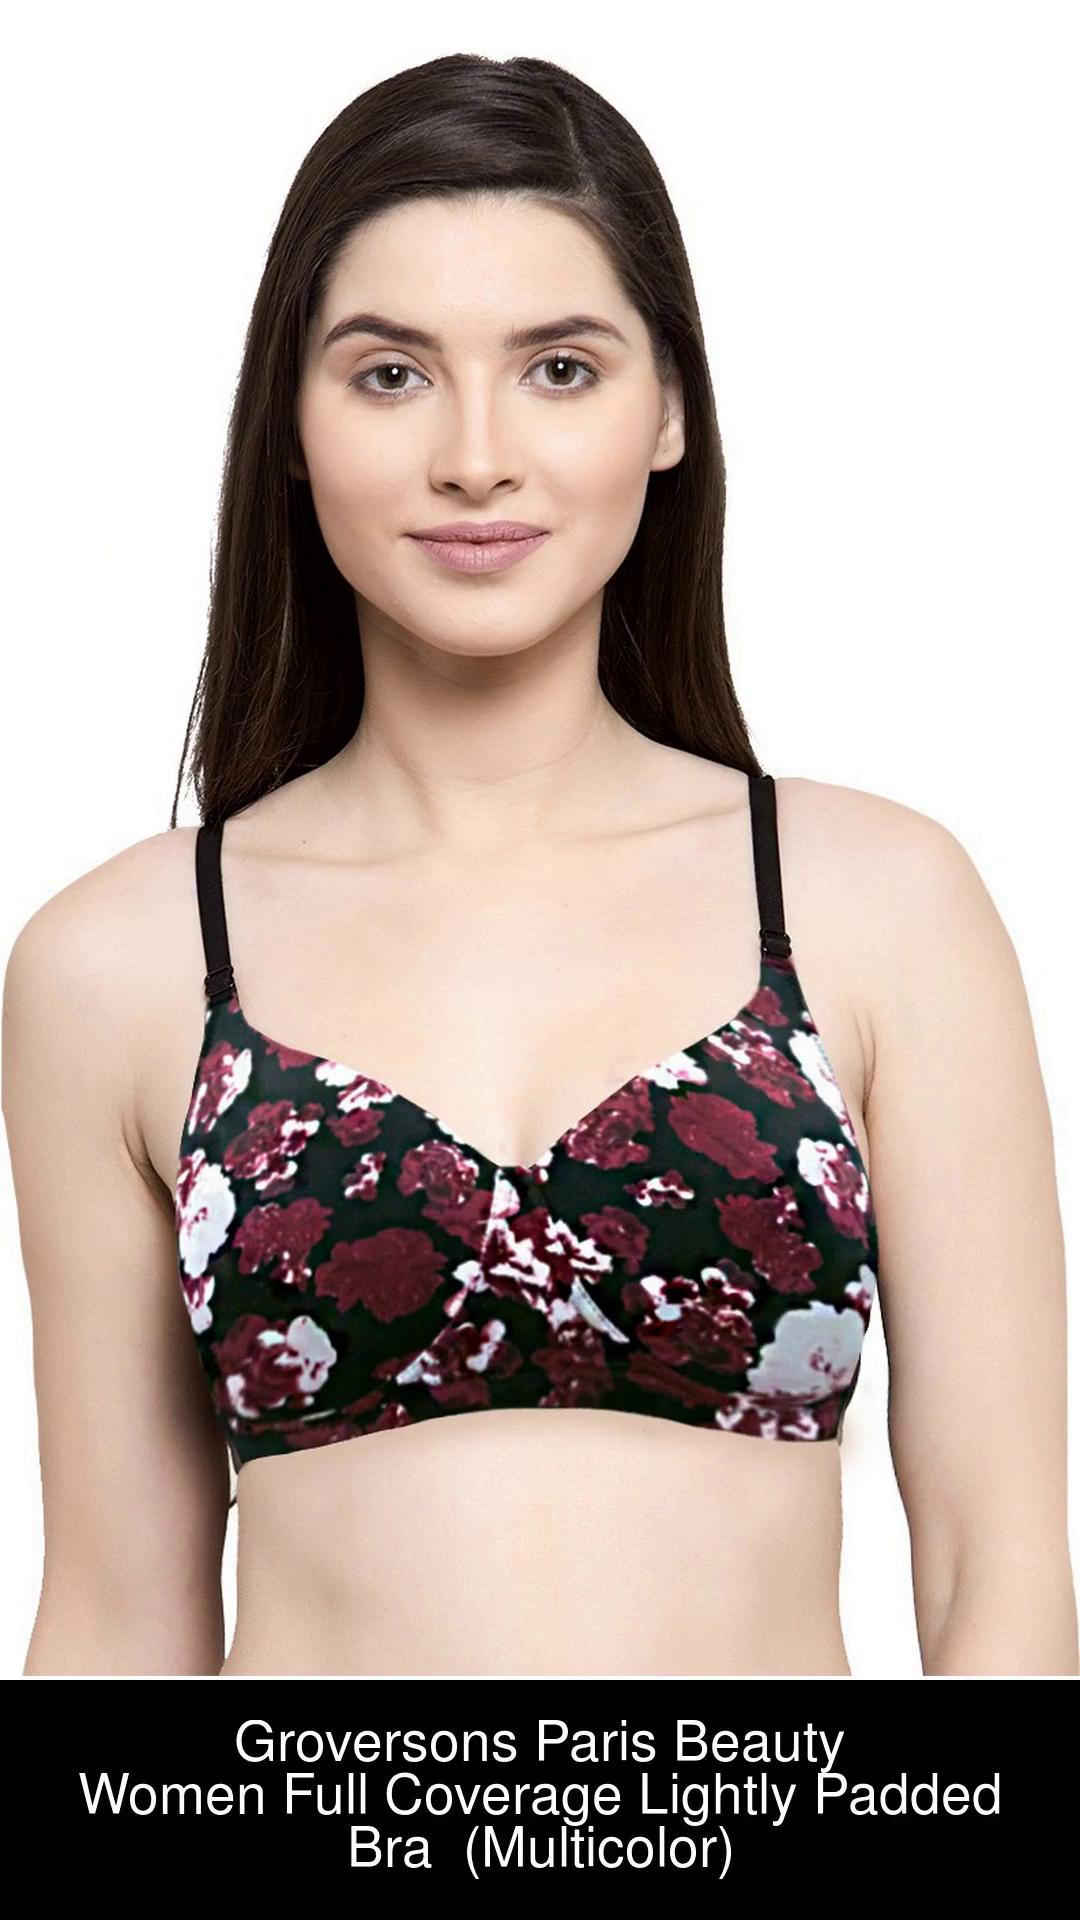 Groversons Paris Beauty Light padded wirefree T-shirt bra in big floral  print Women Full Coverage Lightly Padded Bra